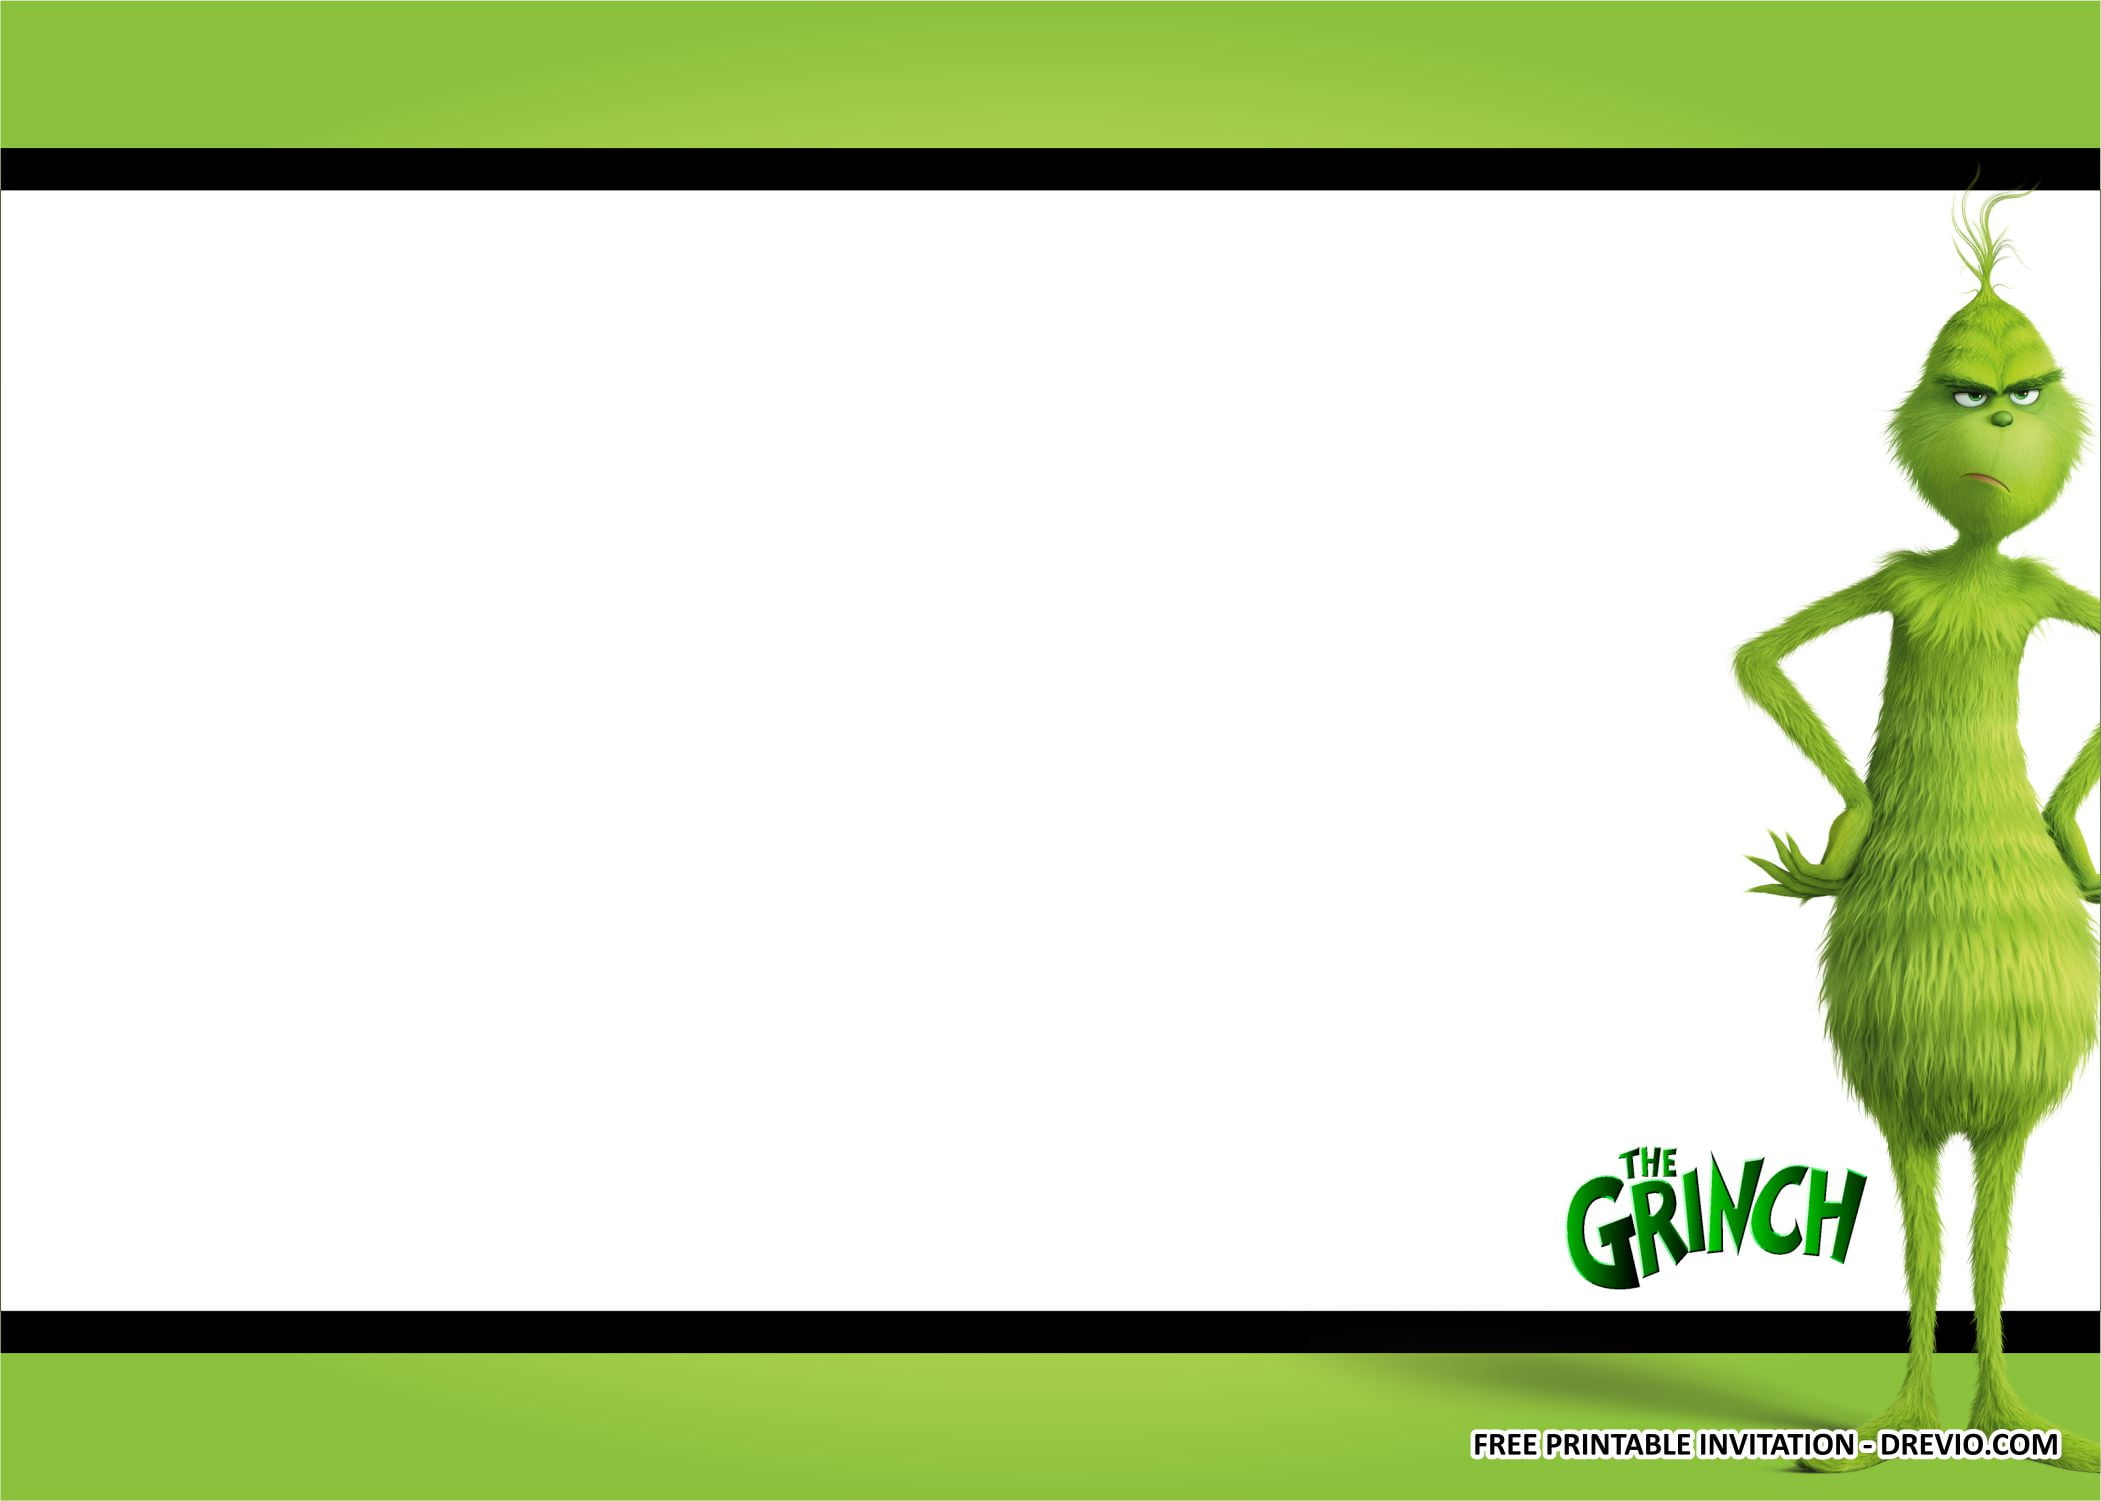 the-grinch-invitation-templates-2-download-hundreds-free-printable